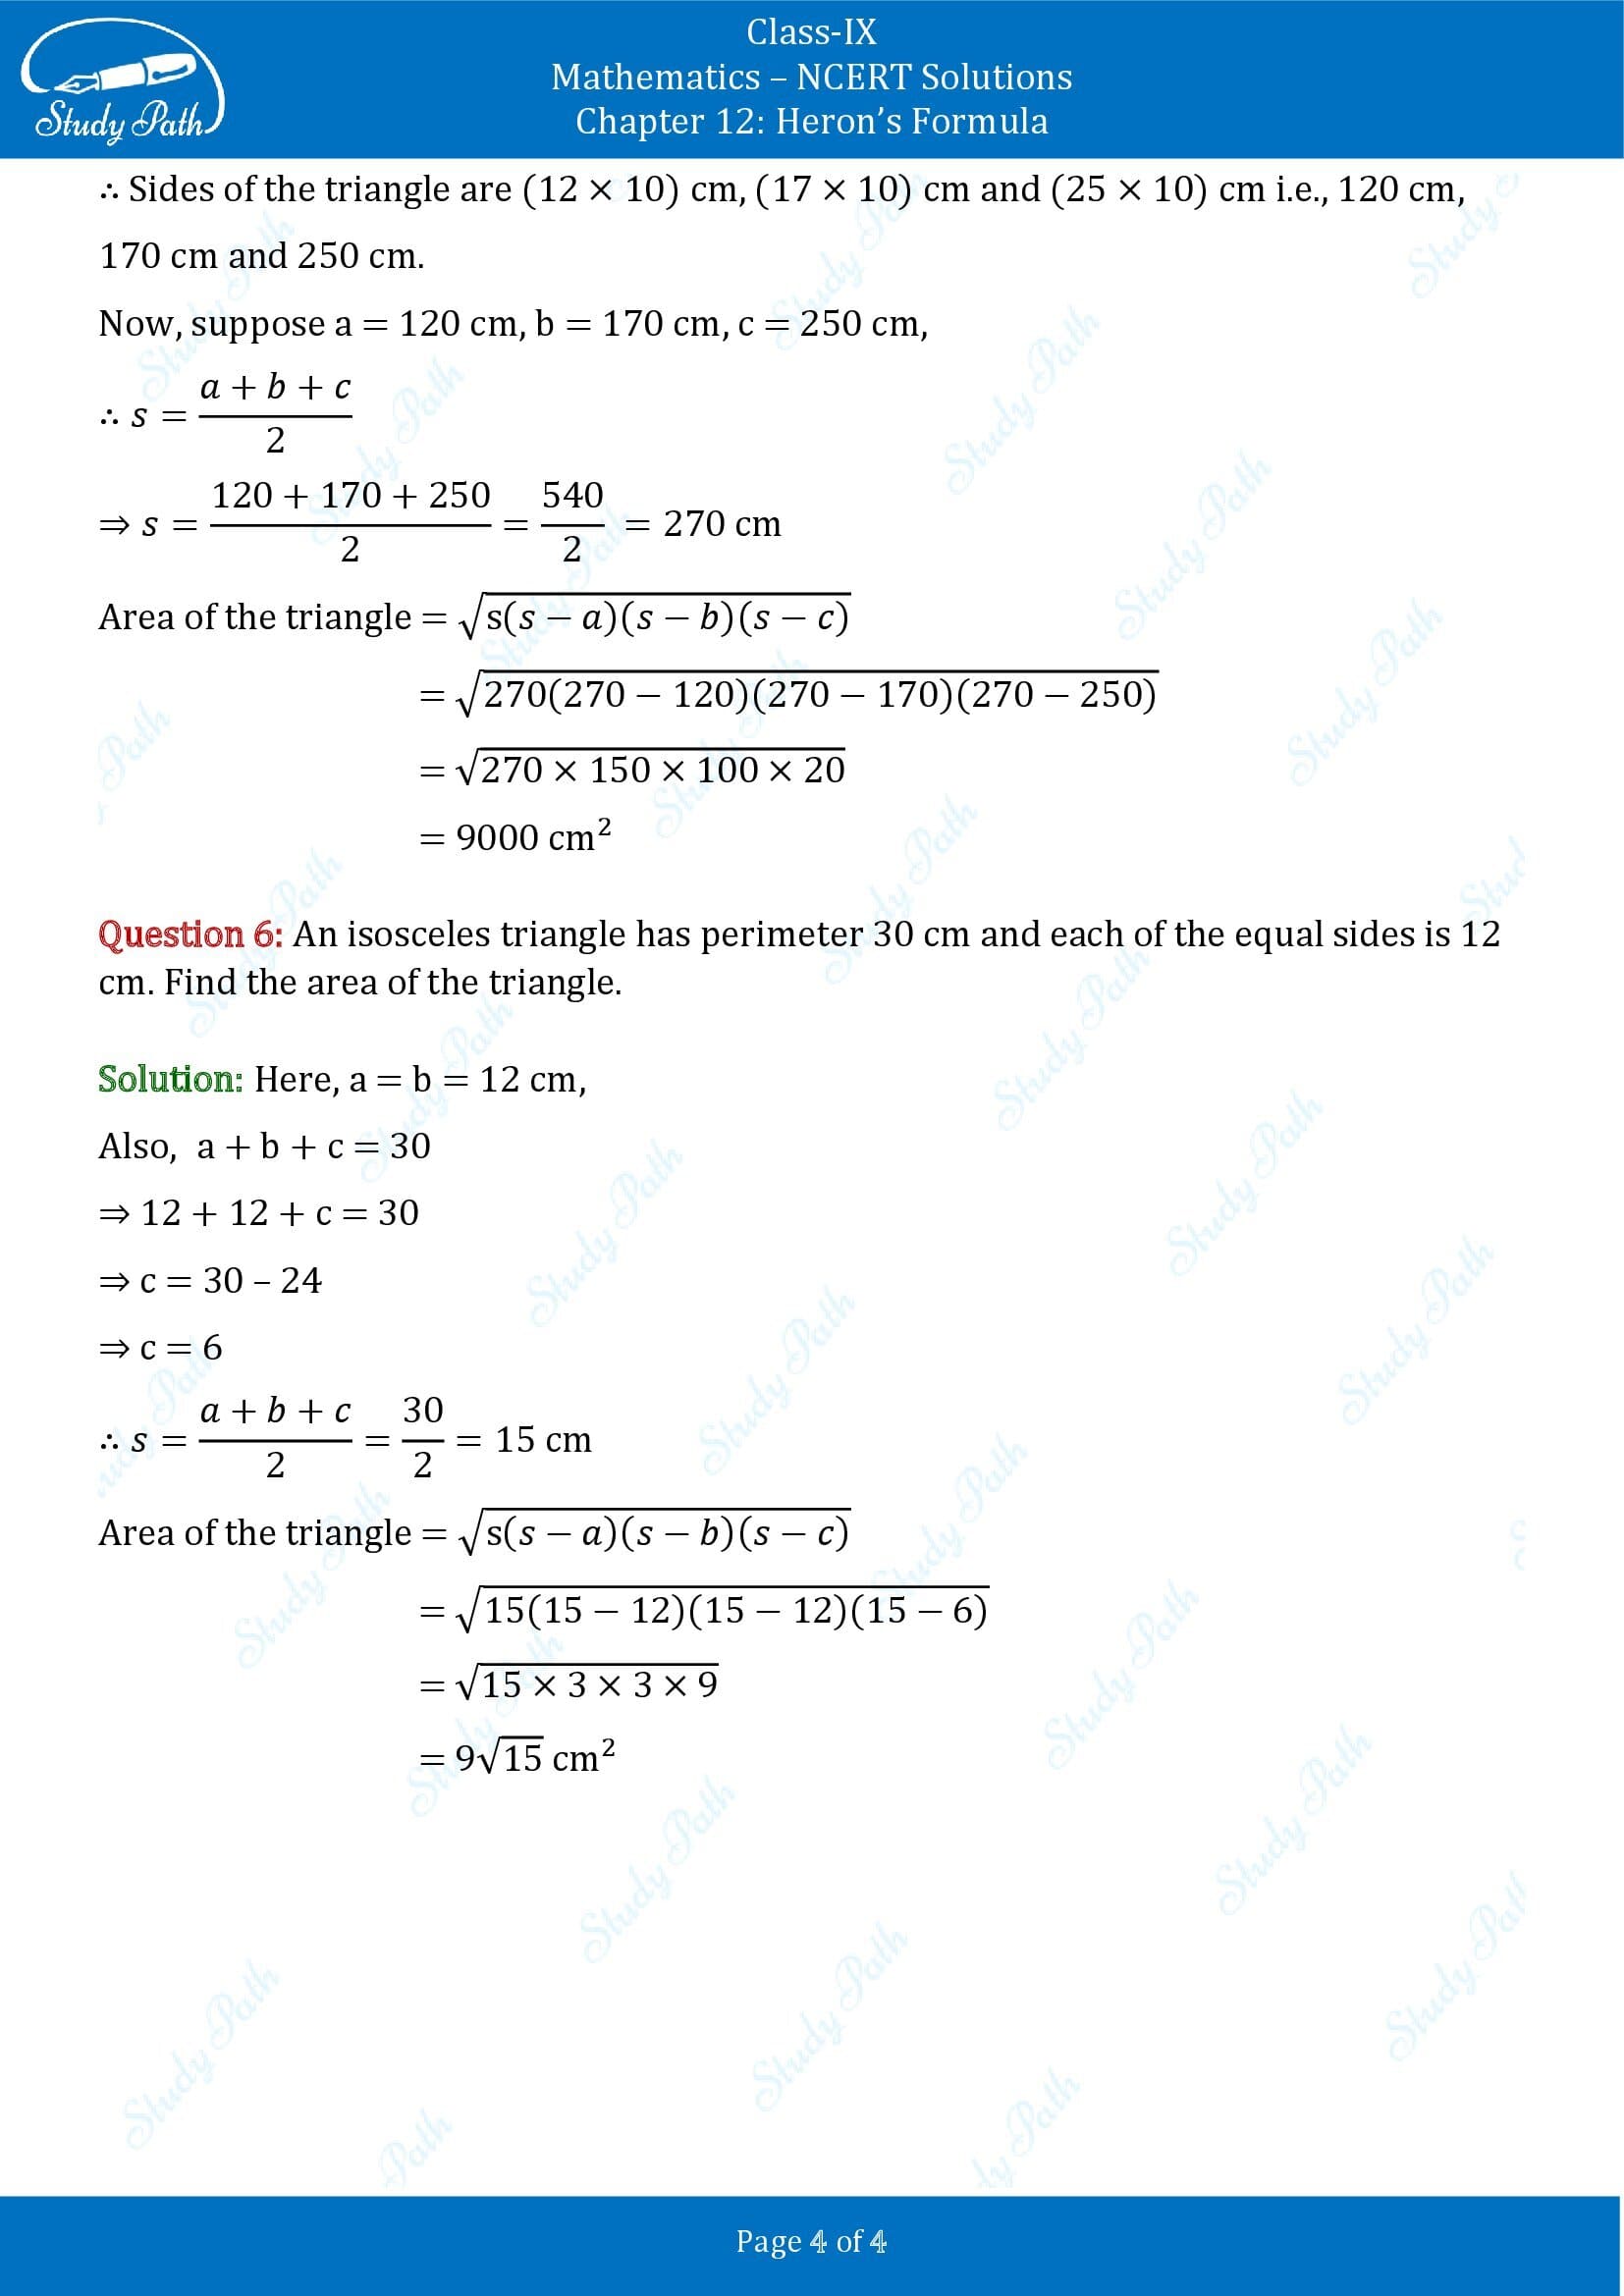 NCERT Solutions for Class 9 Maths Chapter 12 Herons Formula Exercise 12.1 00004